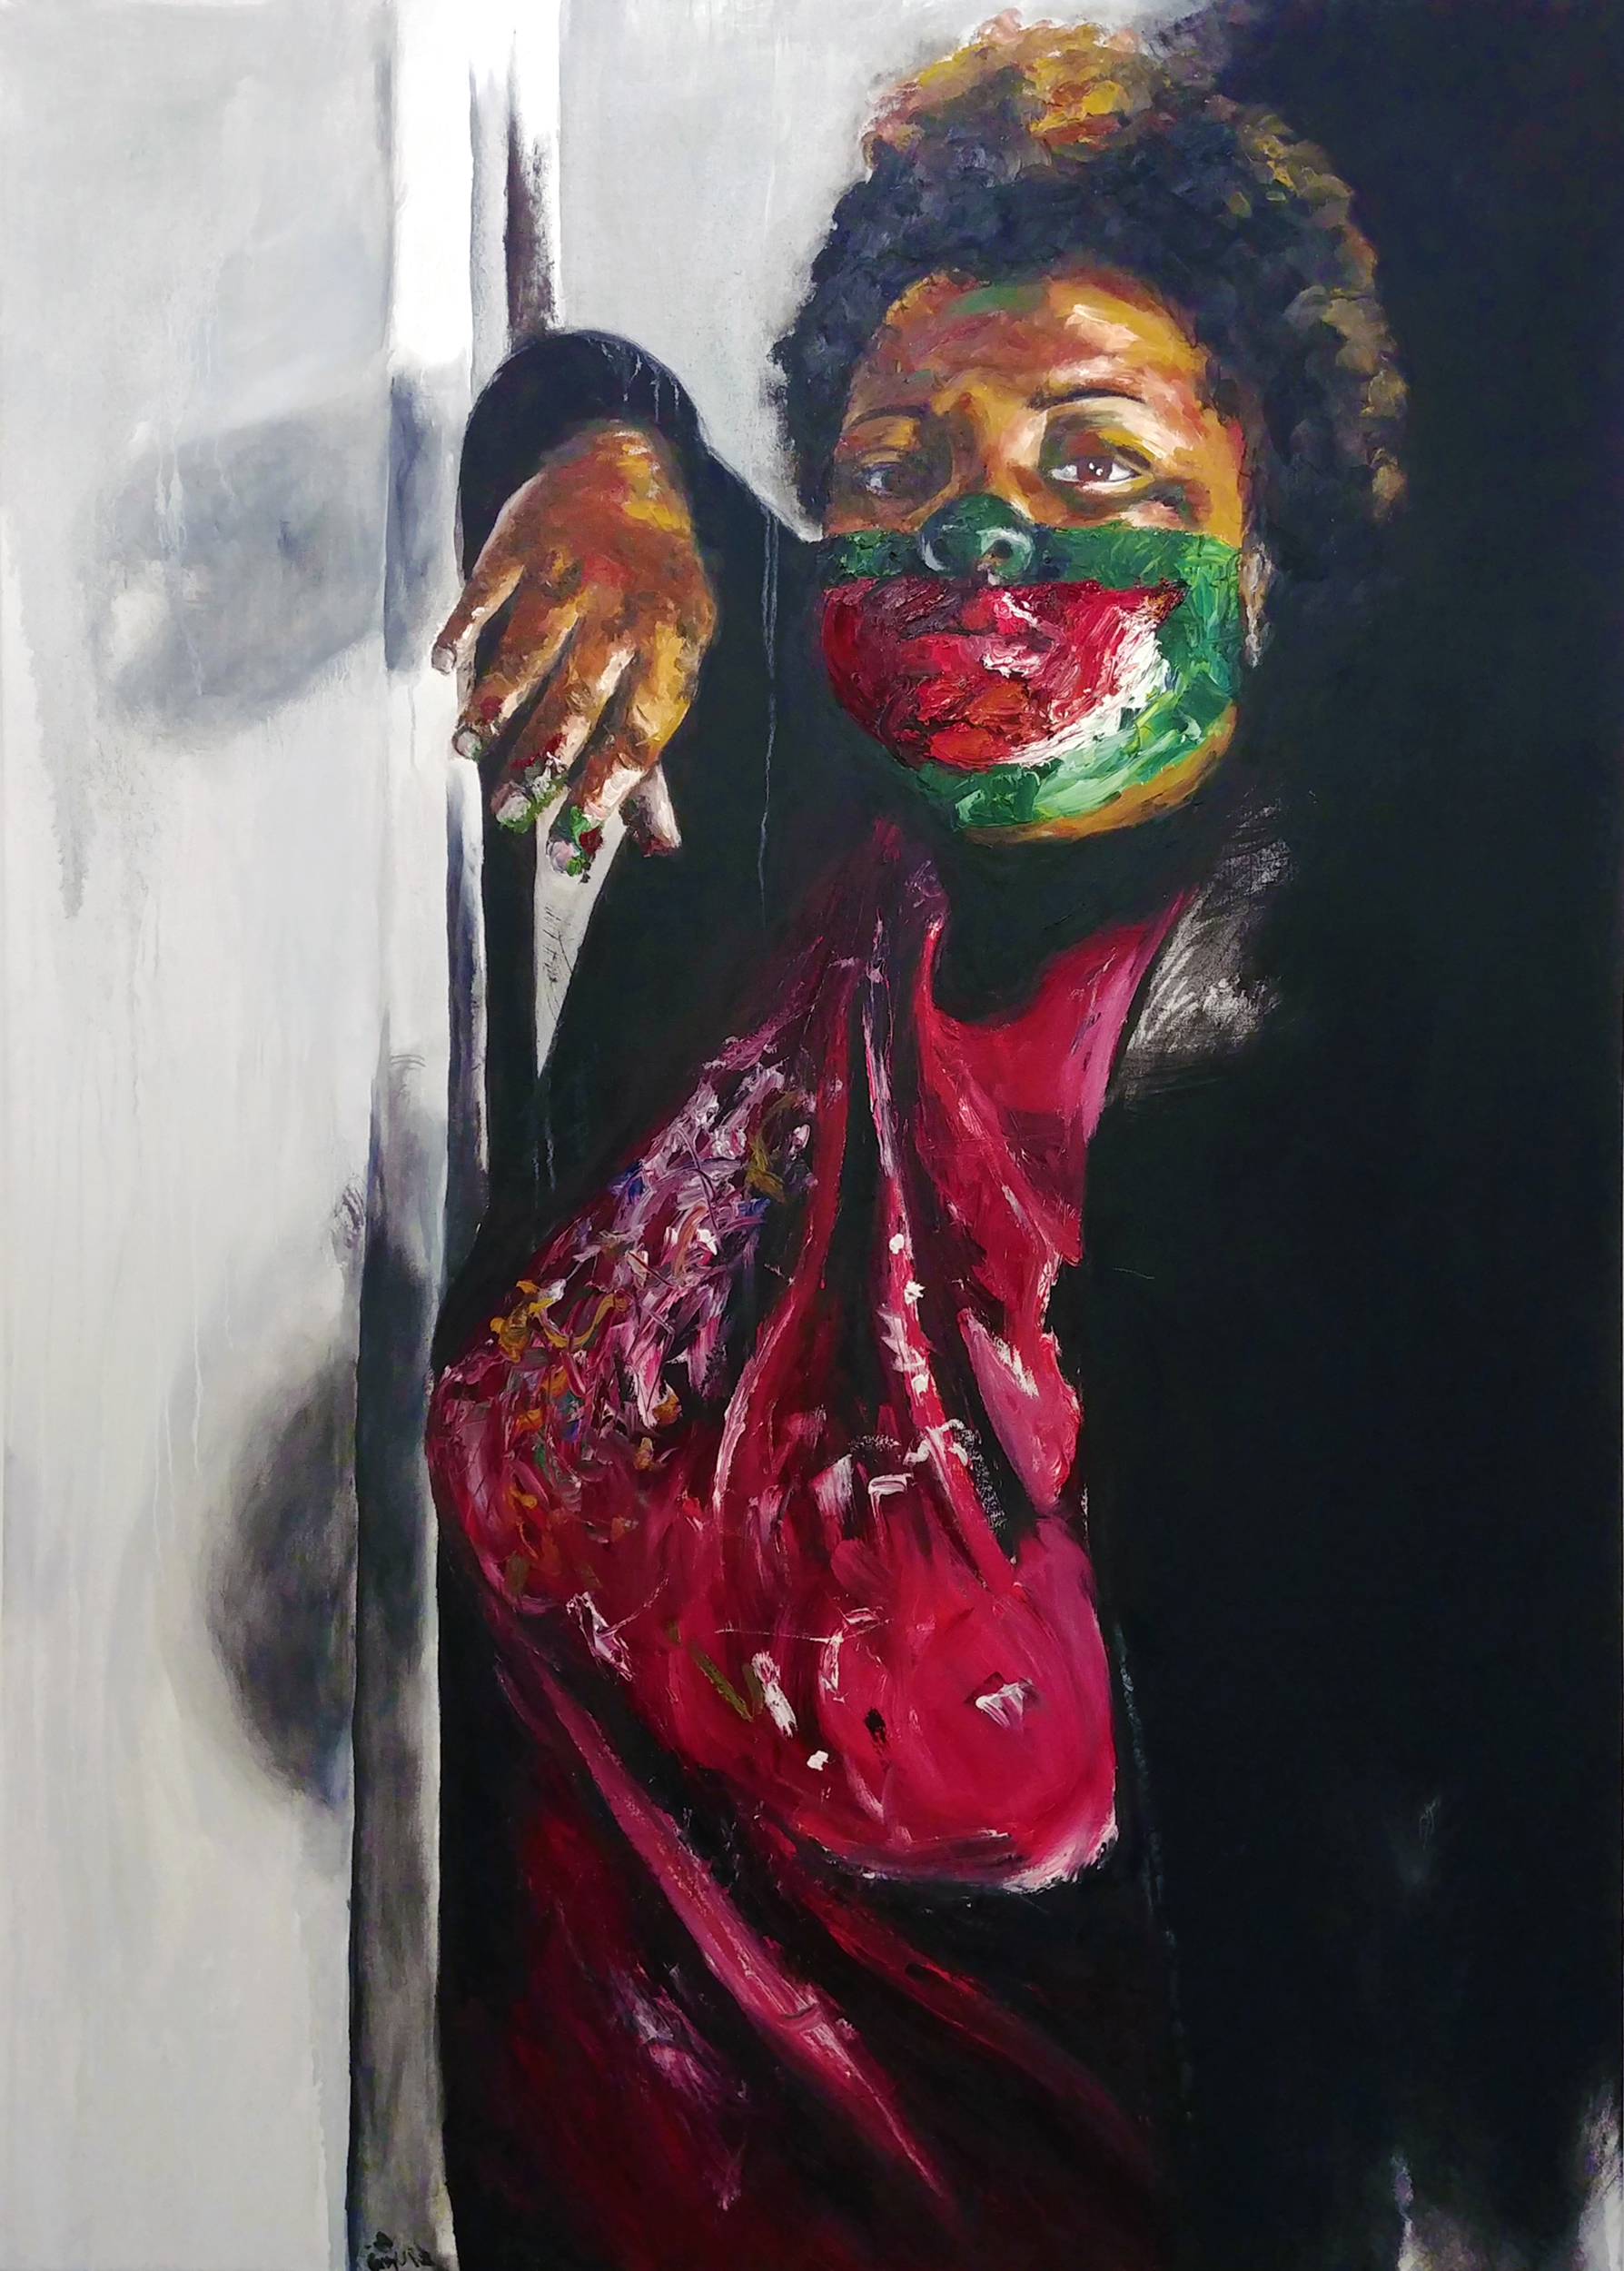 "Is It Anger or Jealousy?" 2019, oil on canvas, 64 x 46 in. "A self-portrait mimicking the blackface imagery. Taking back control of our identity, I ask - does presence make you red with anger or green with jealousy?" ~ Angie Redmond